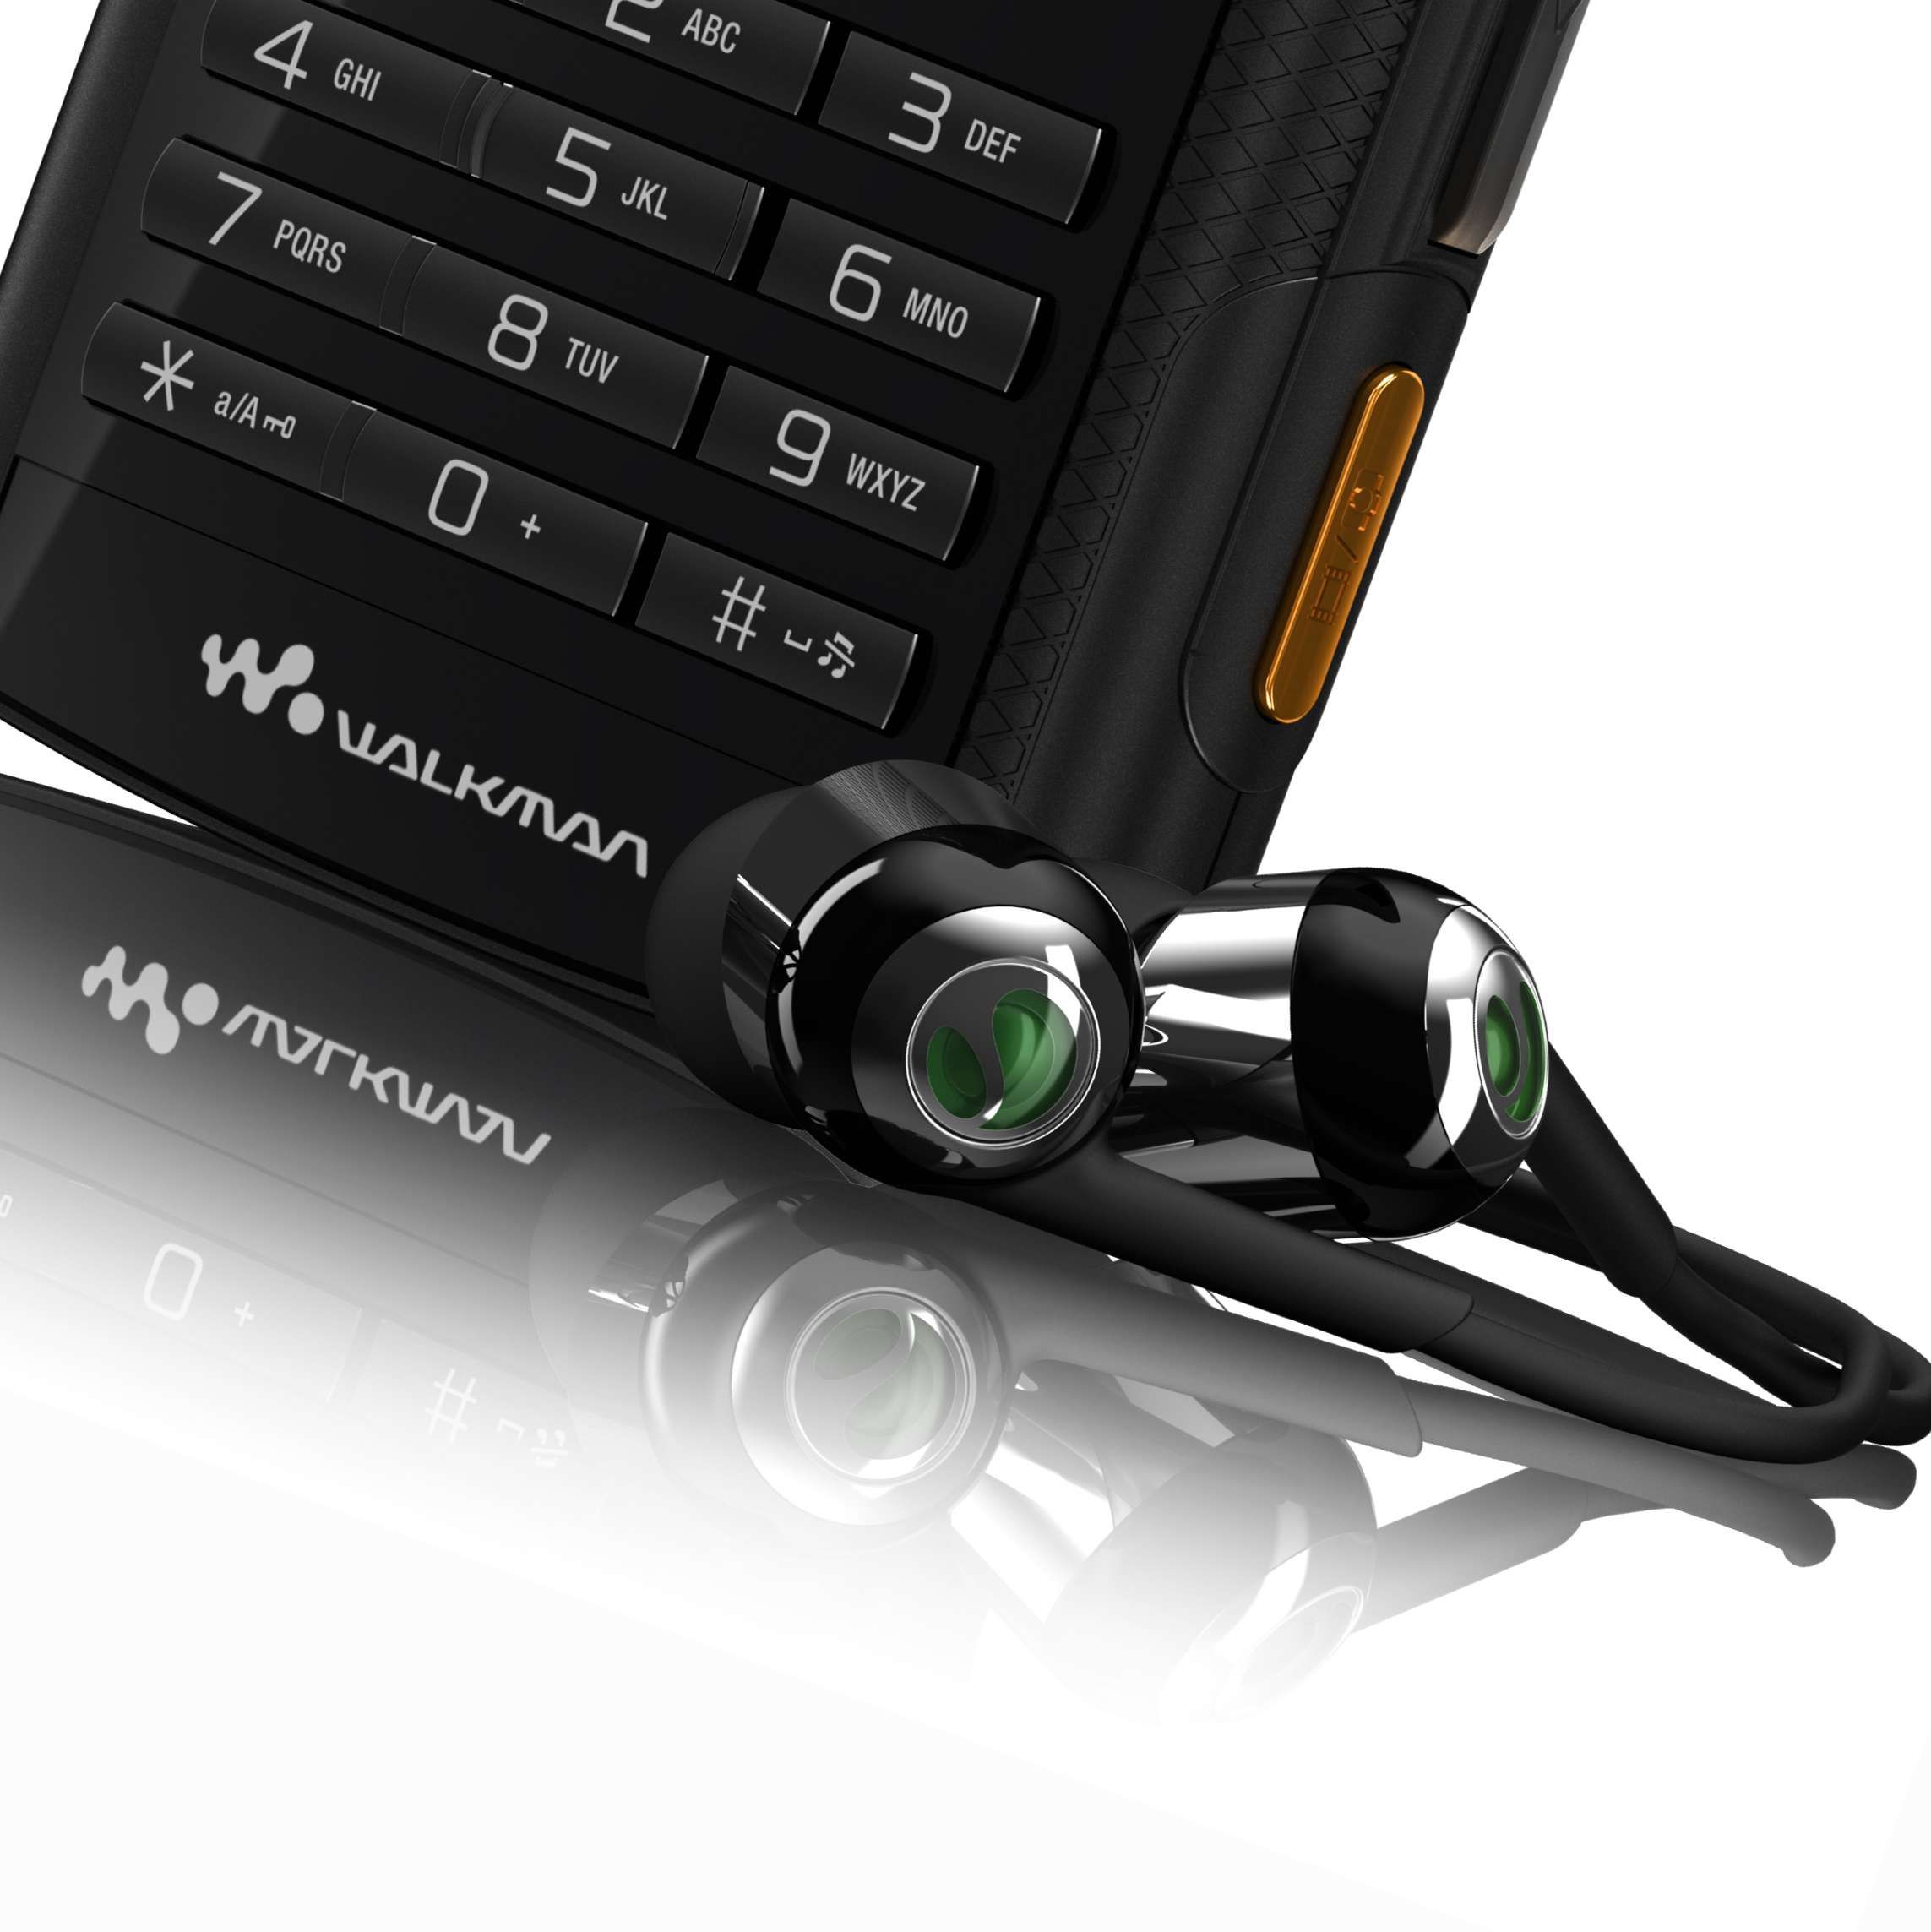 sony ericsson playnow plus to challenge nokia comes with music image 1